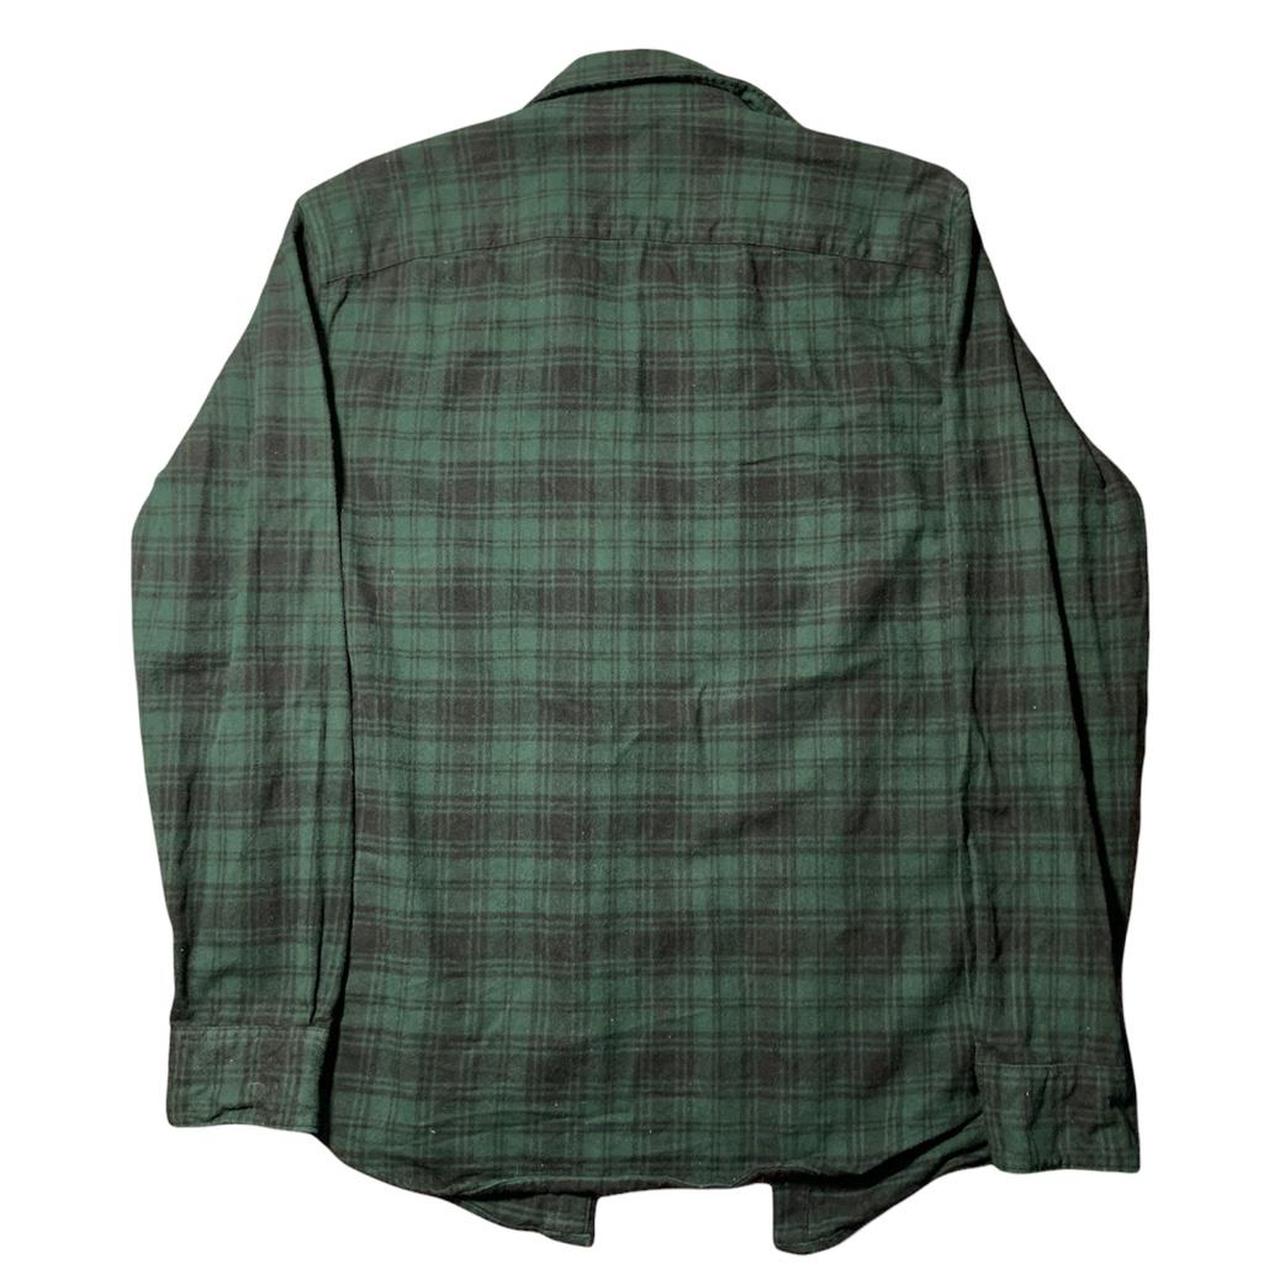 Abercrombie & Fitch flannel shirt in green and... - Depop